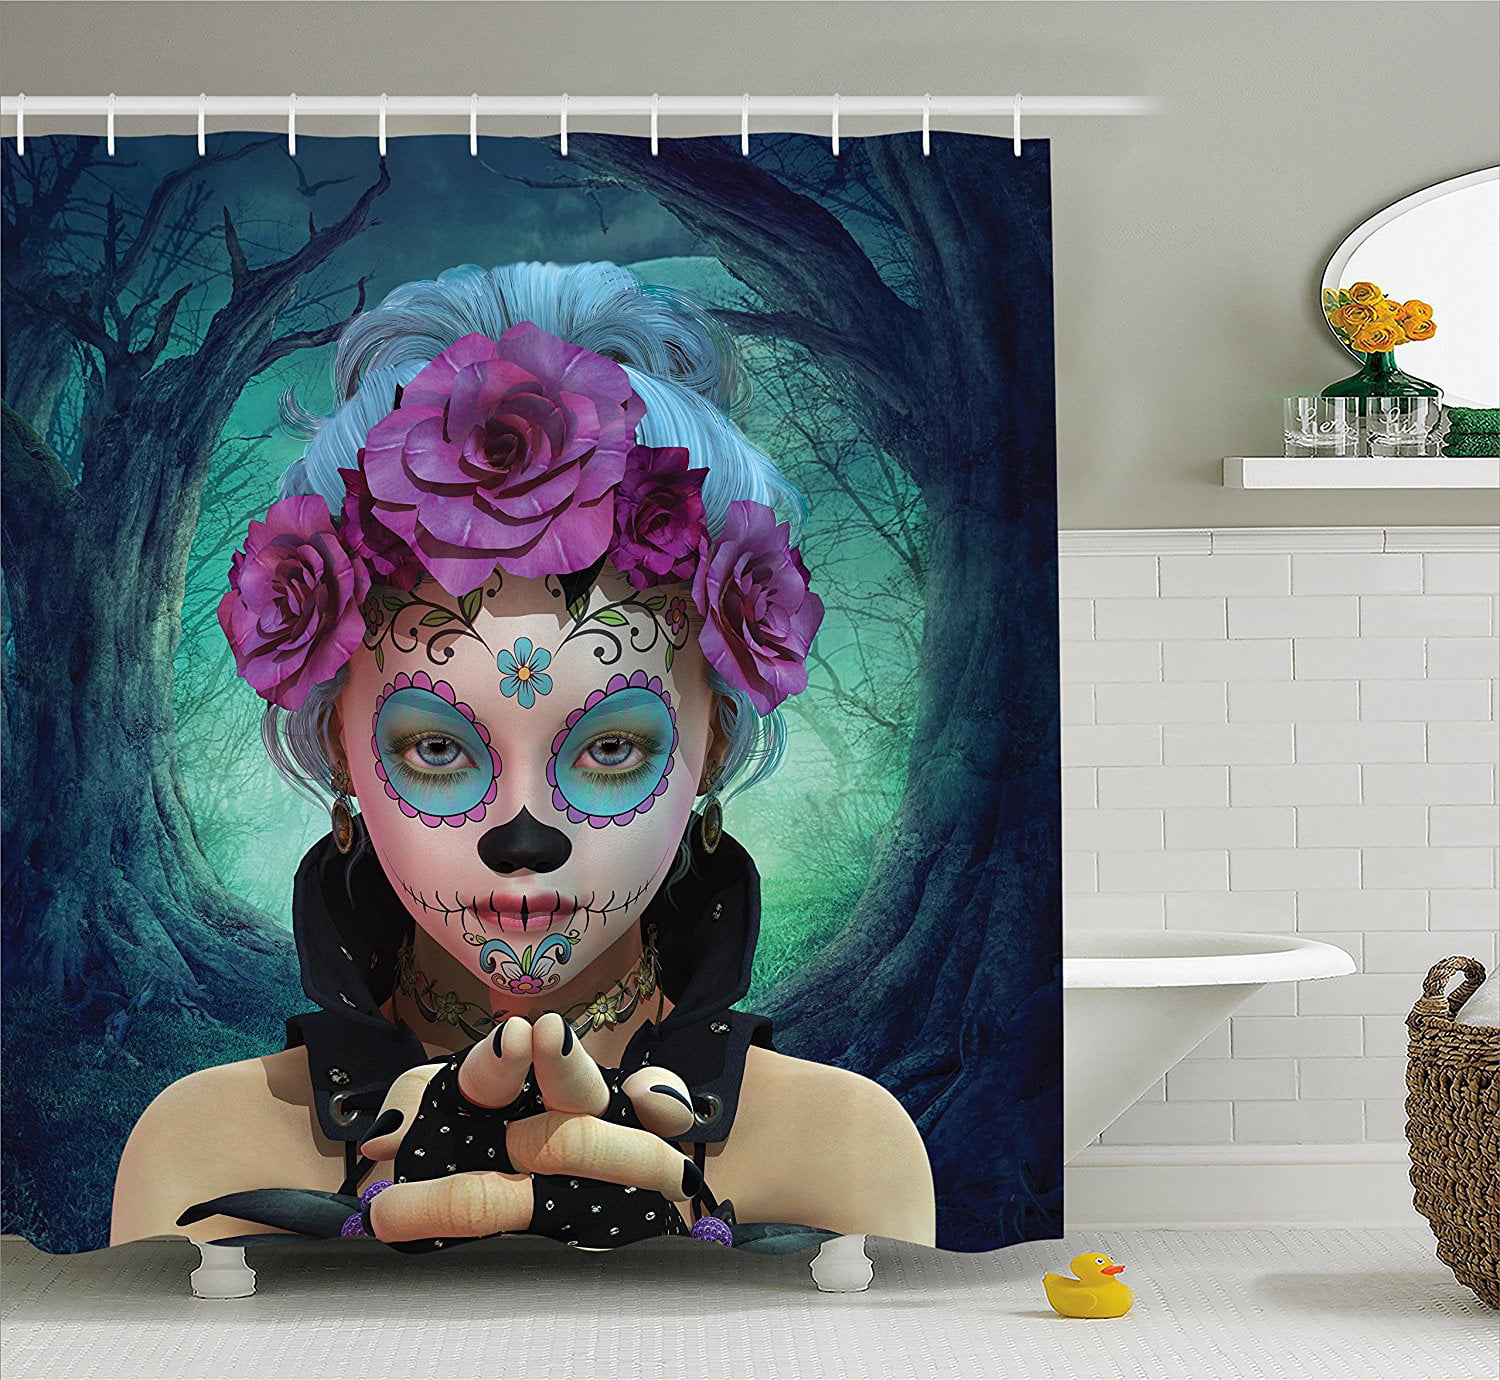 Details about   Day of the Dead Halloween Clown Makeup Face Waterproof Fabric Shower Curtain Set 